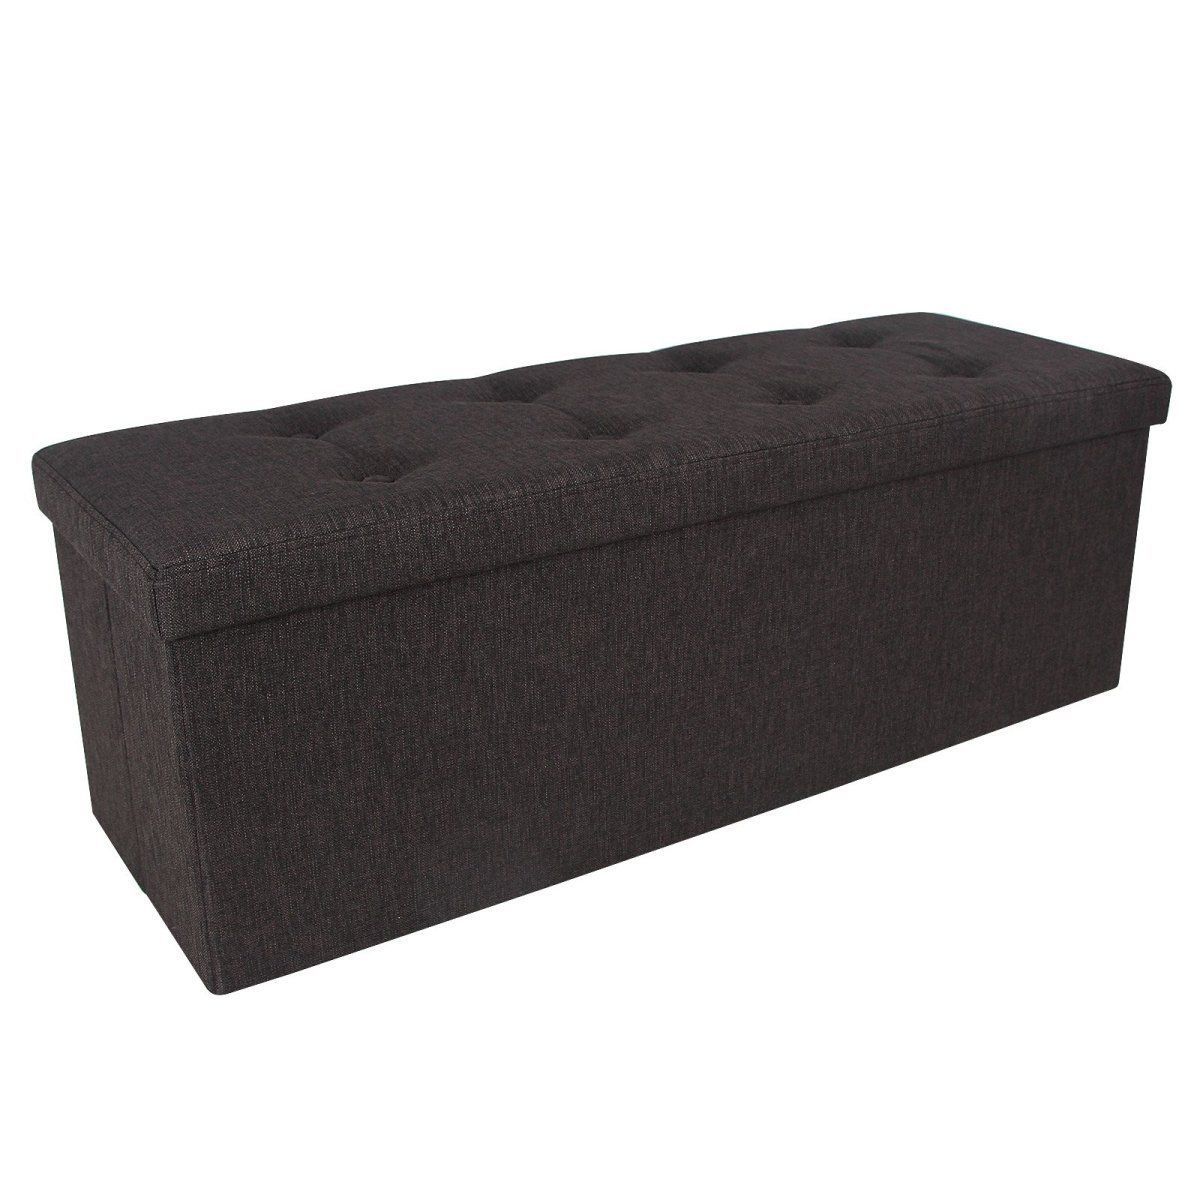 Homcom Pu Square Storage Stool Footrest Ottoman Seat Organizer For Footstool Pouffe Sofa Folding Bed (View 5 of 15)